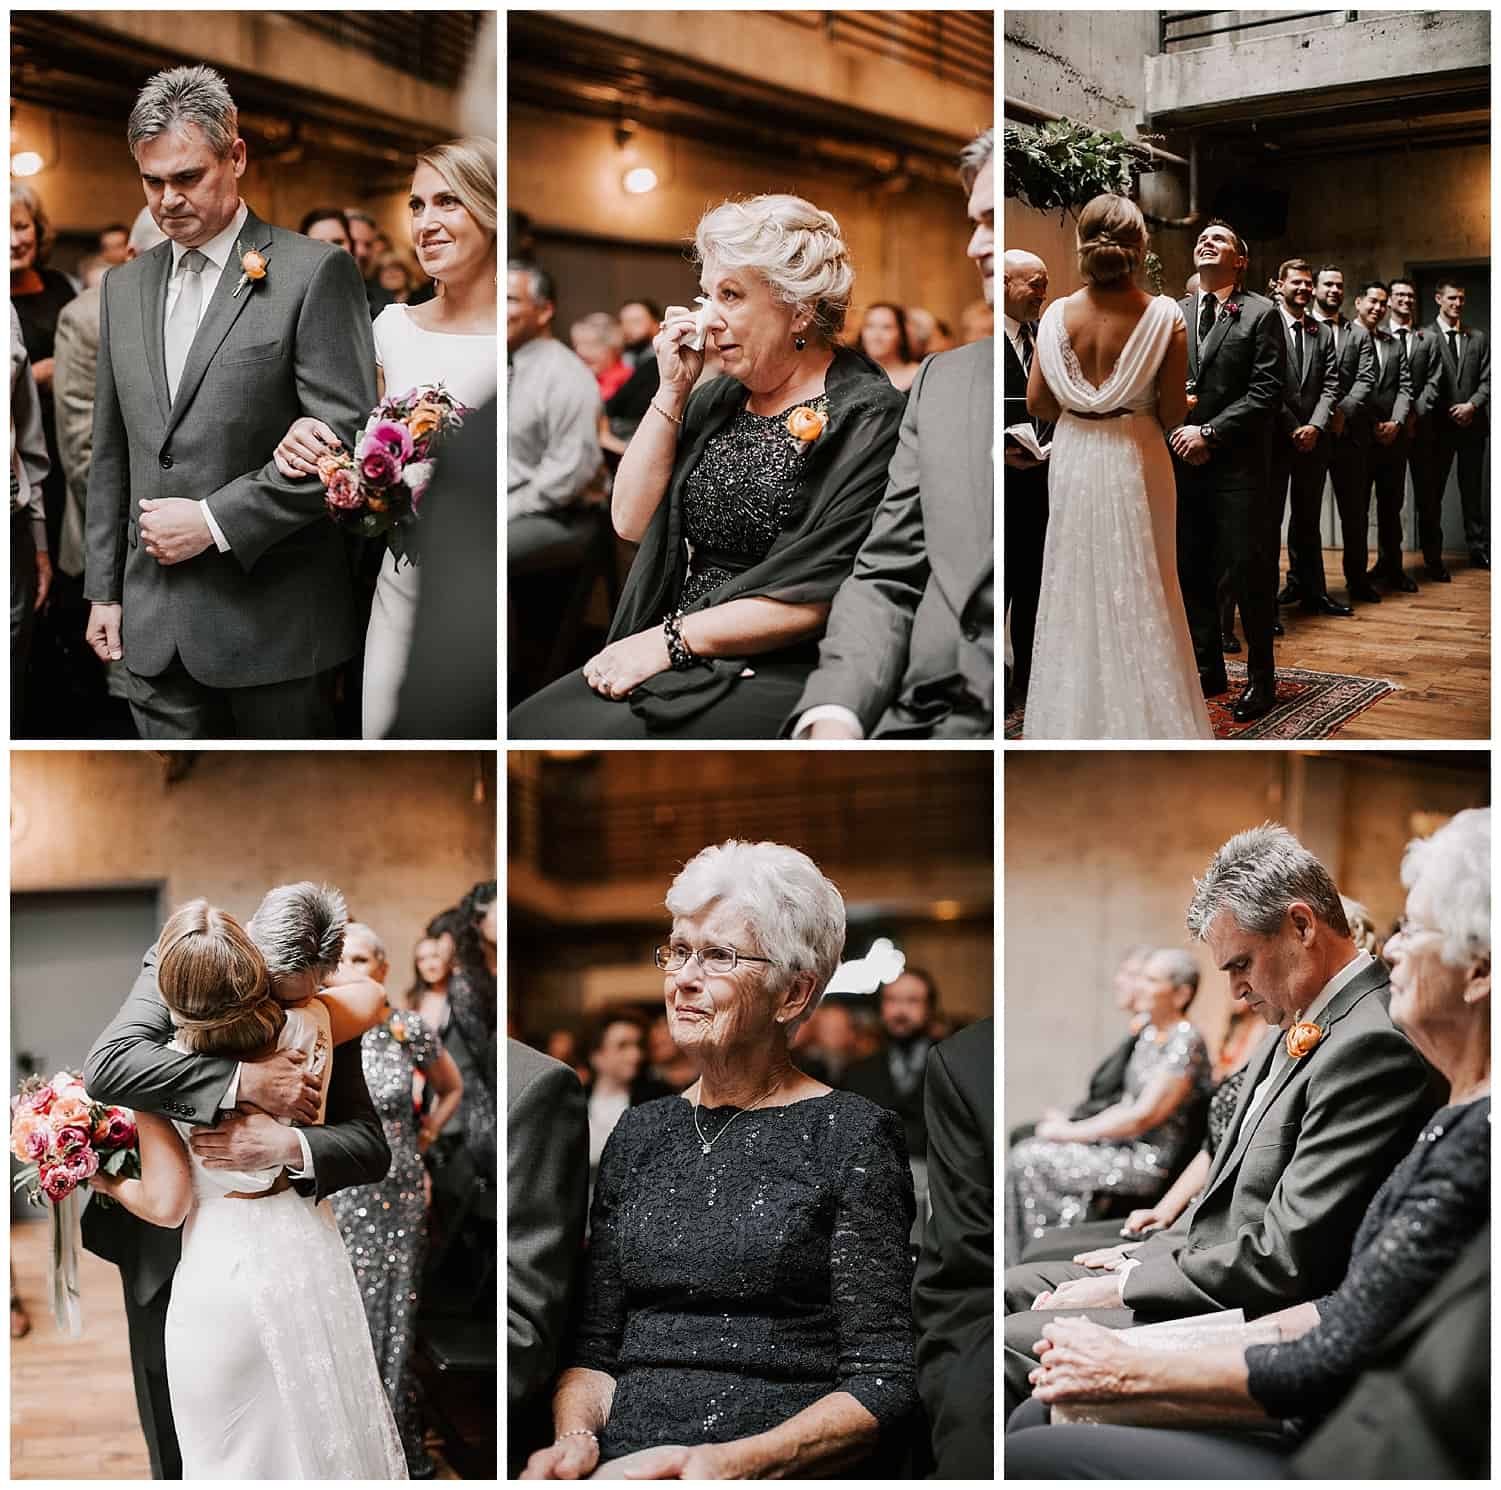 Fremont Foundry wedding photos in Seattle by Kyle Goldie of Luma Weddings